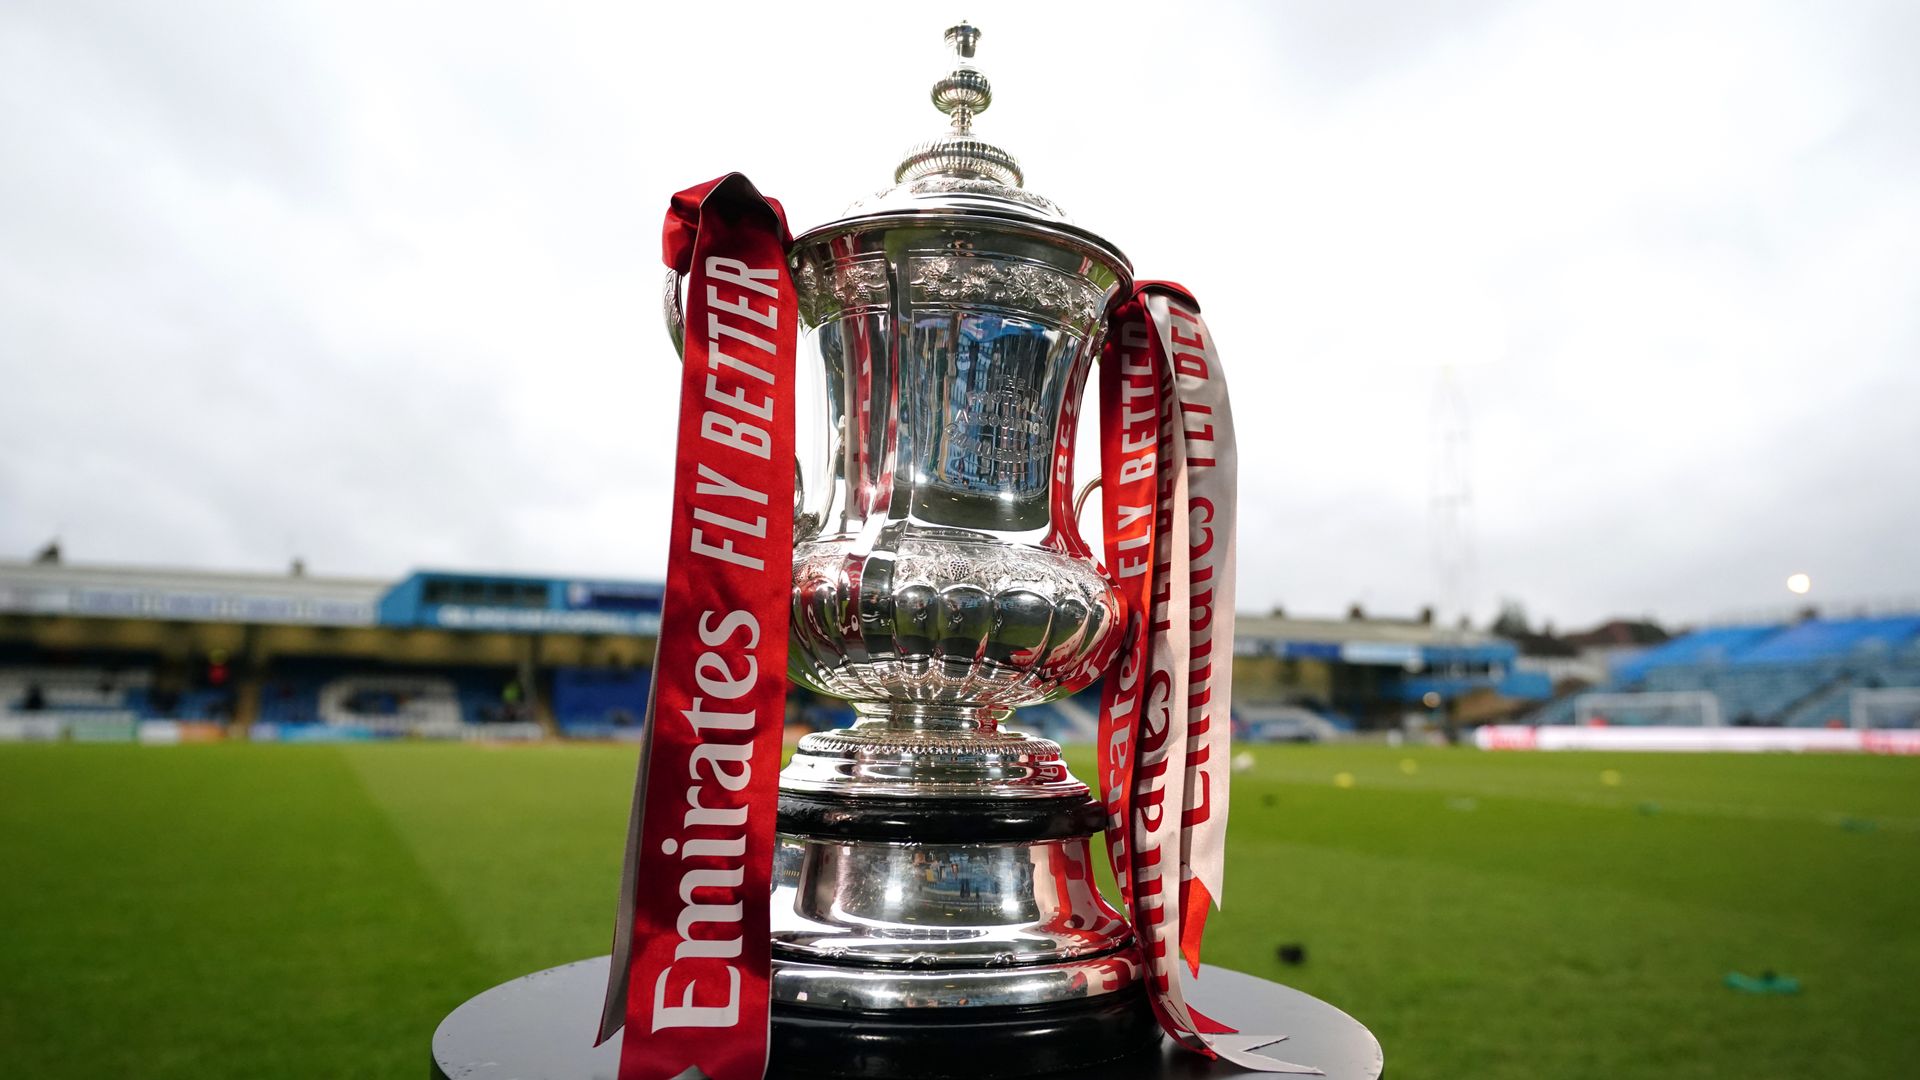 'Protest is needed' - Clubs hit out as FA Cup replays scrapped